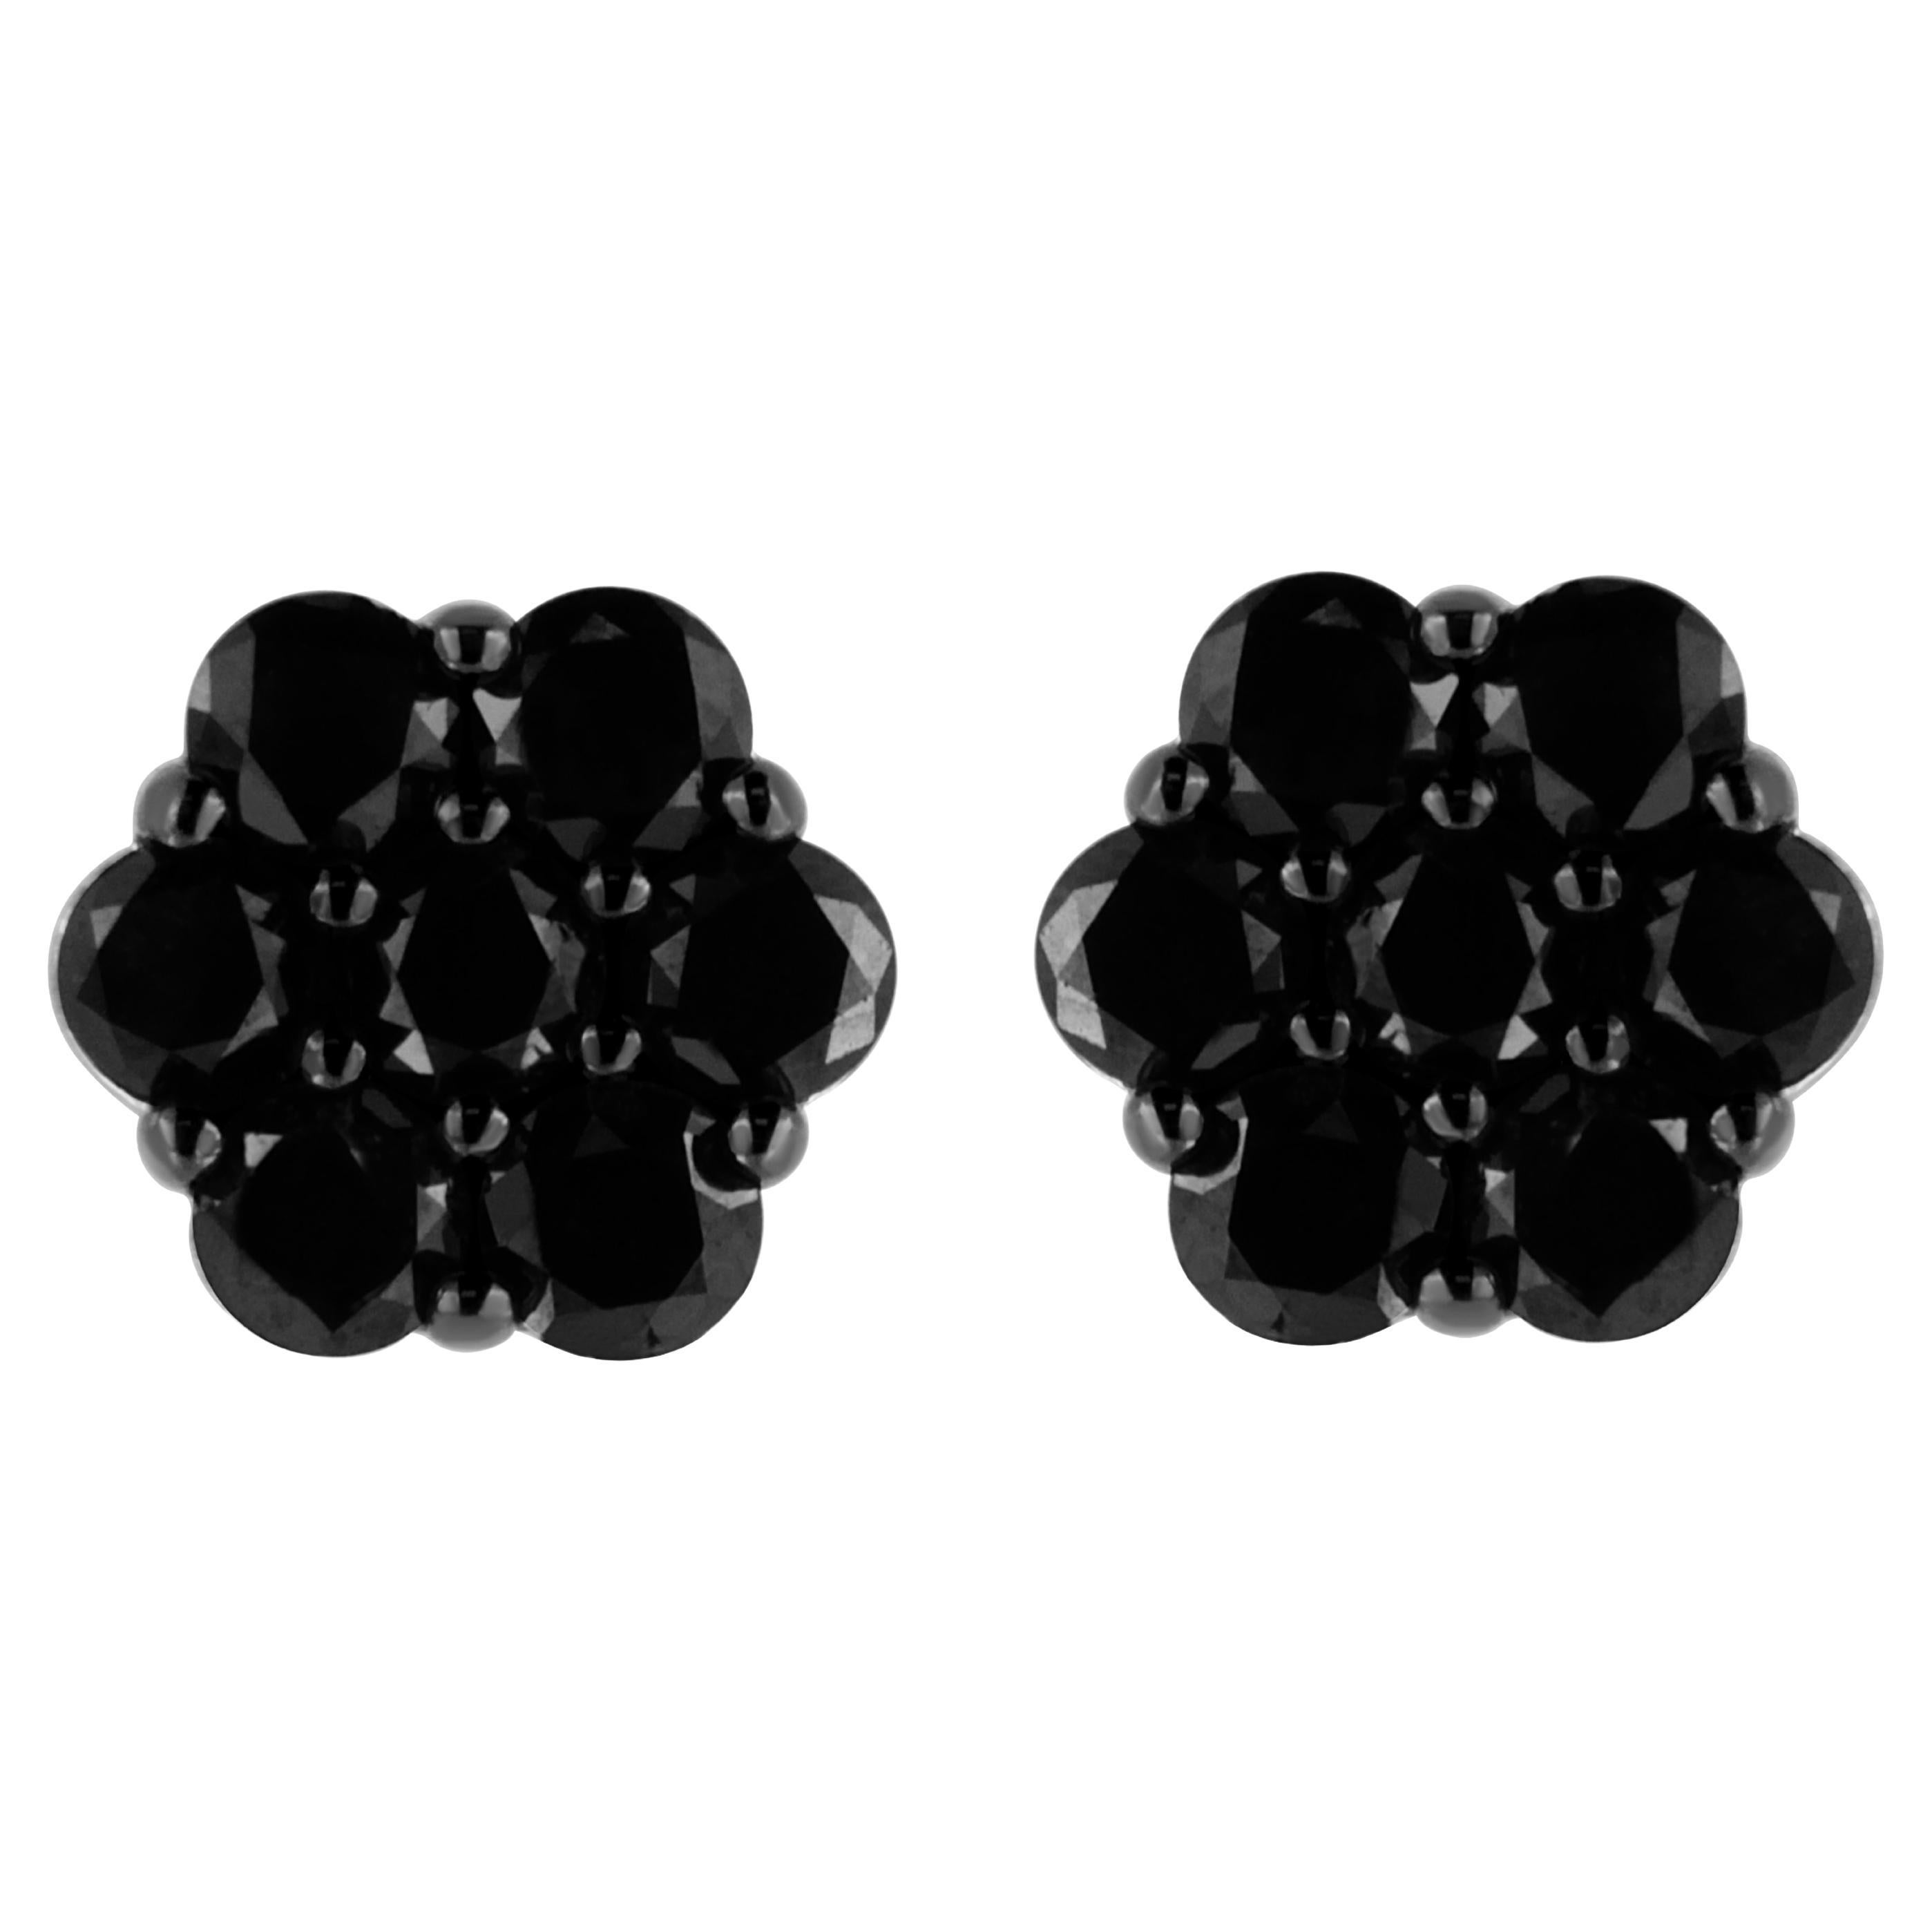 .925 Sterling Silver 4.0 Carat Treated Black Diamond Floral Cluster Stud Earring